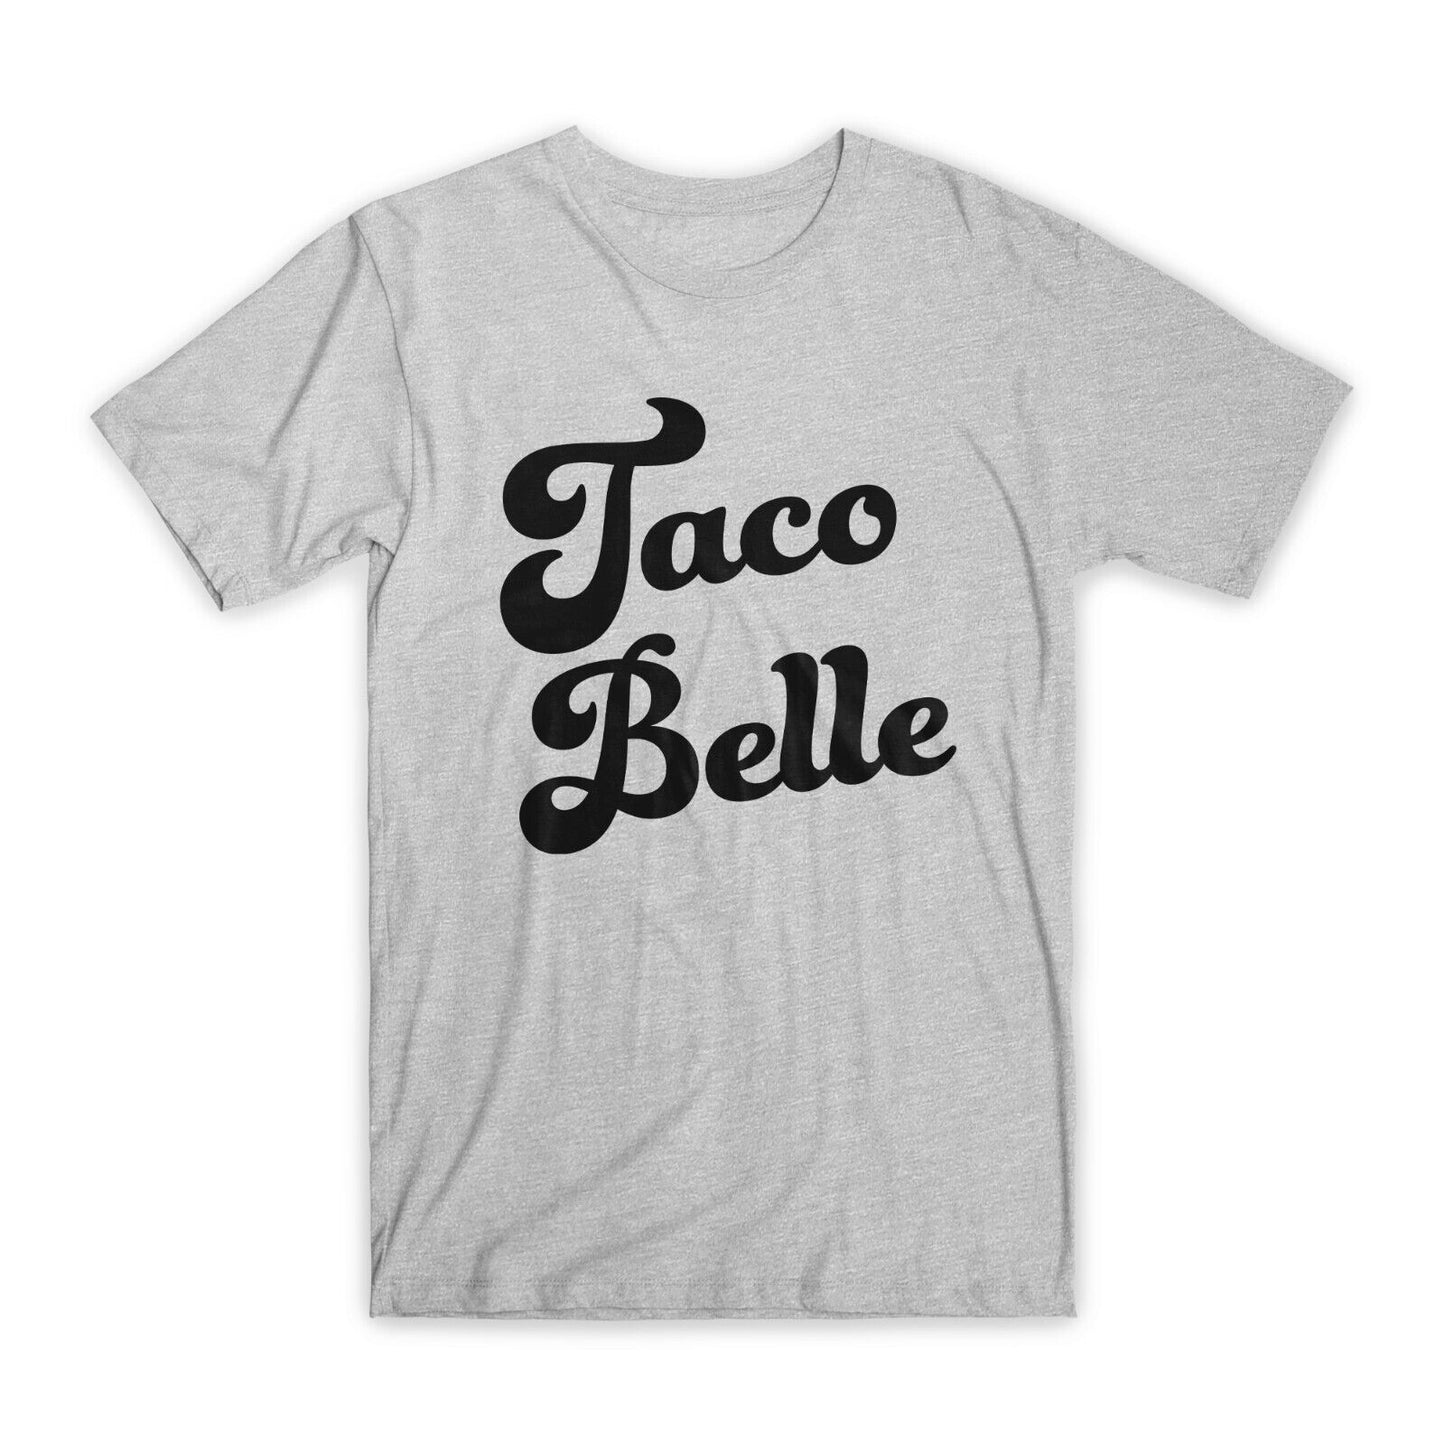 Taco Belle T-Shirt Premium Soft Cotton Crew Neck Funny Tees Novelty Gifts NEW